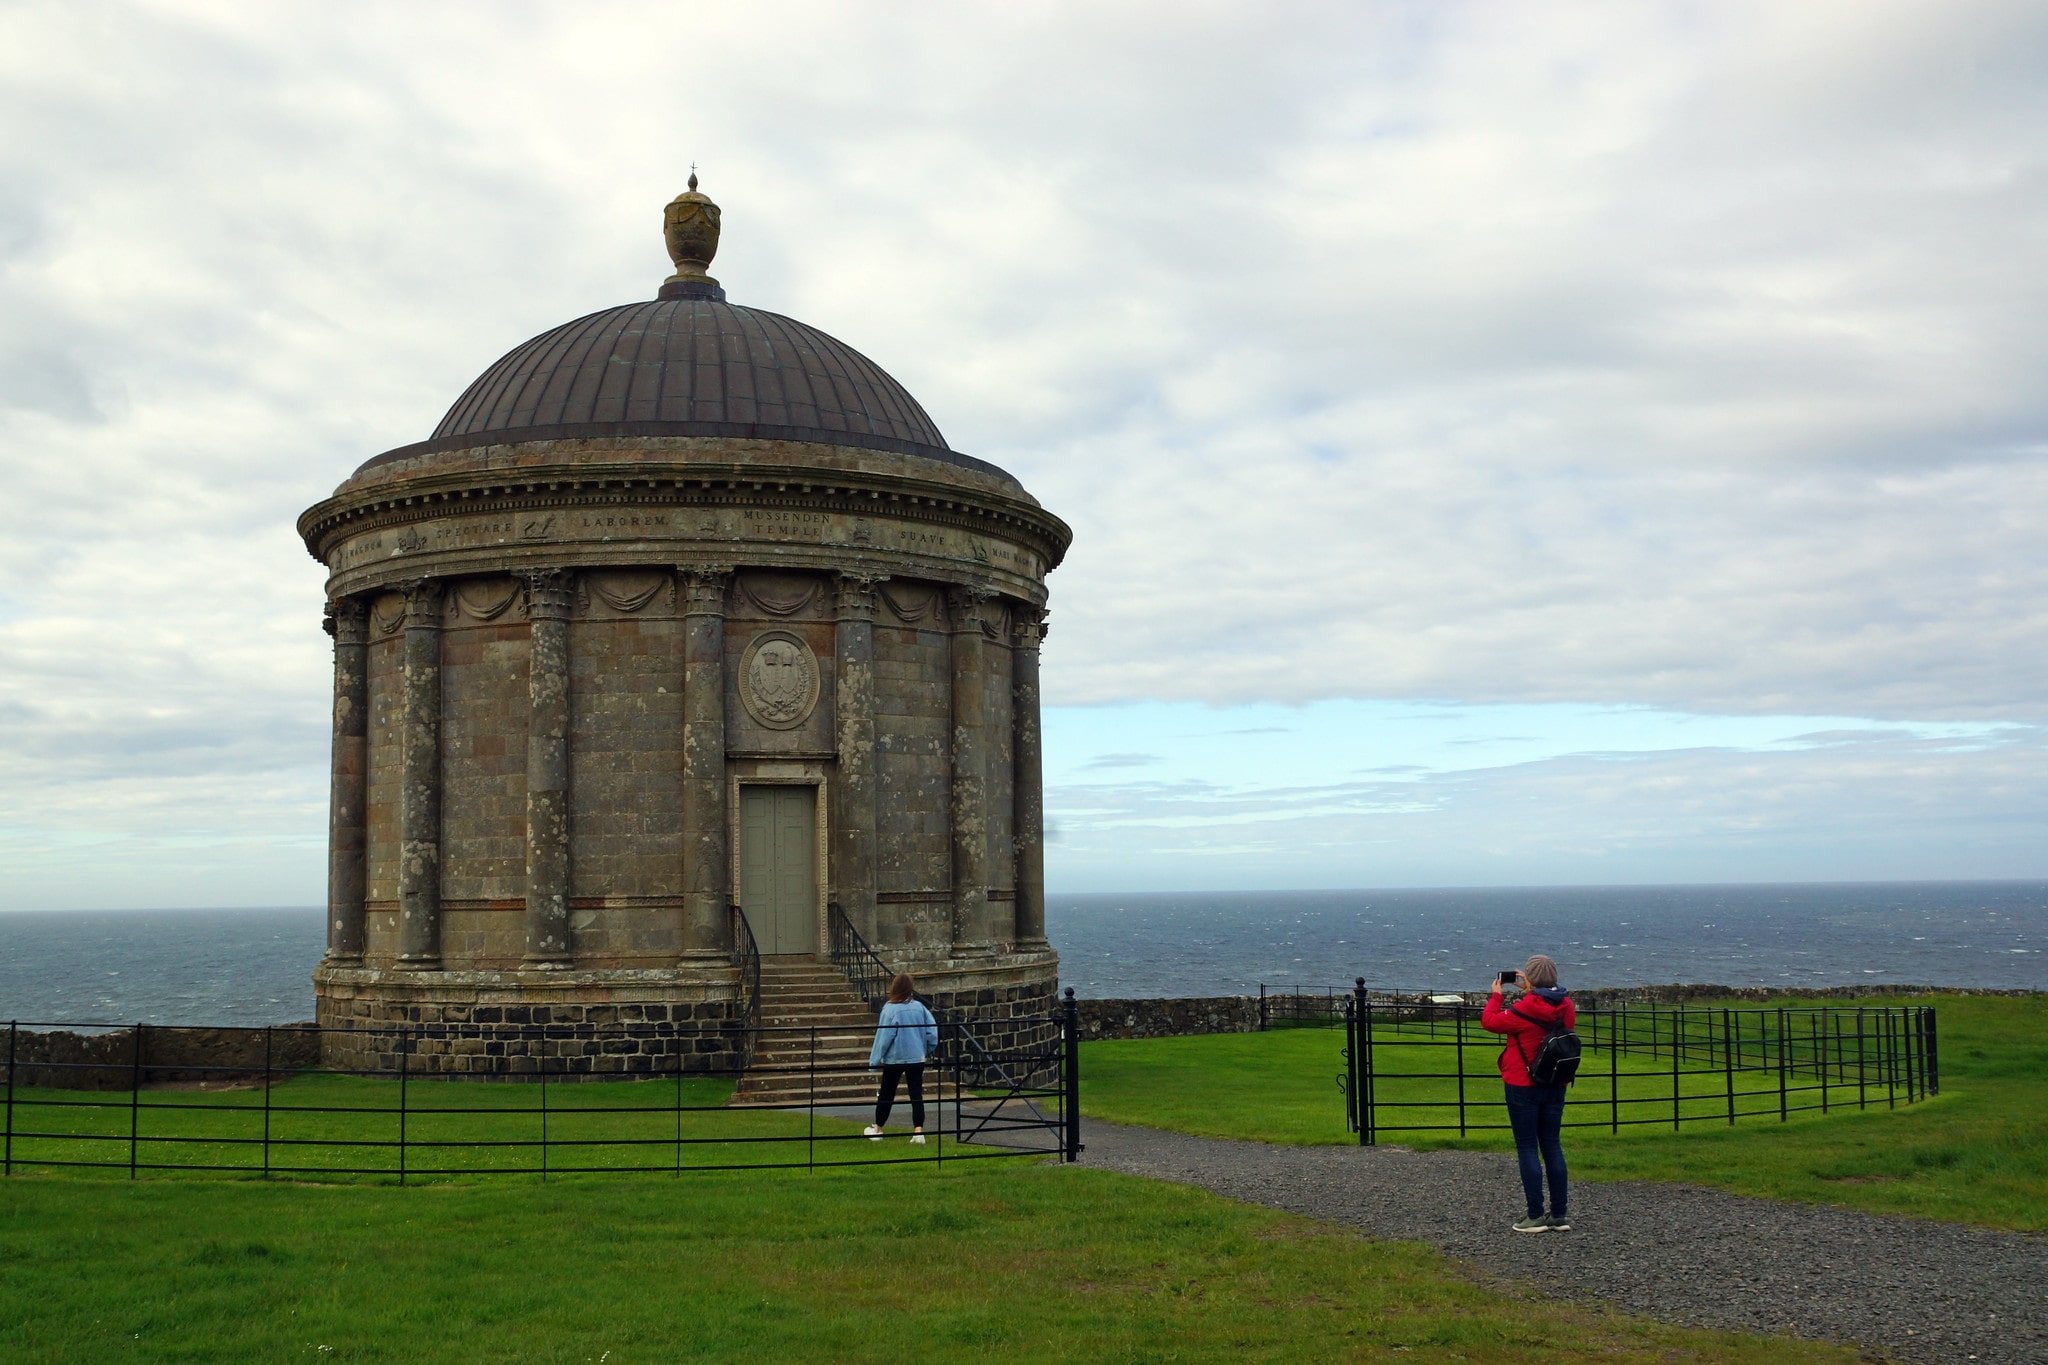 Exploring the Mussenden Temple is one of the coolest things to do in Northern Ireland